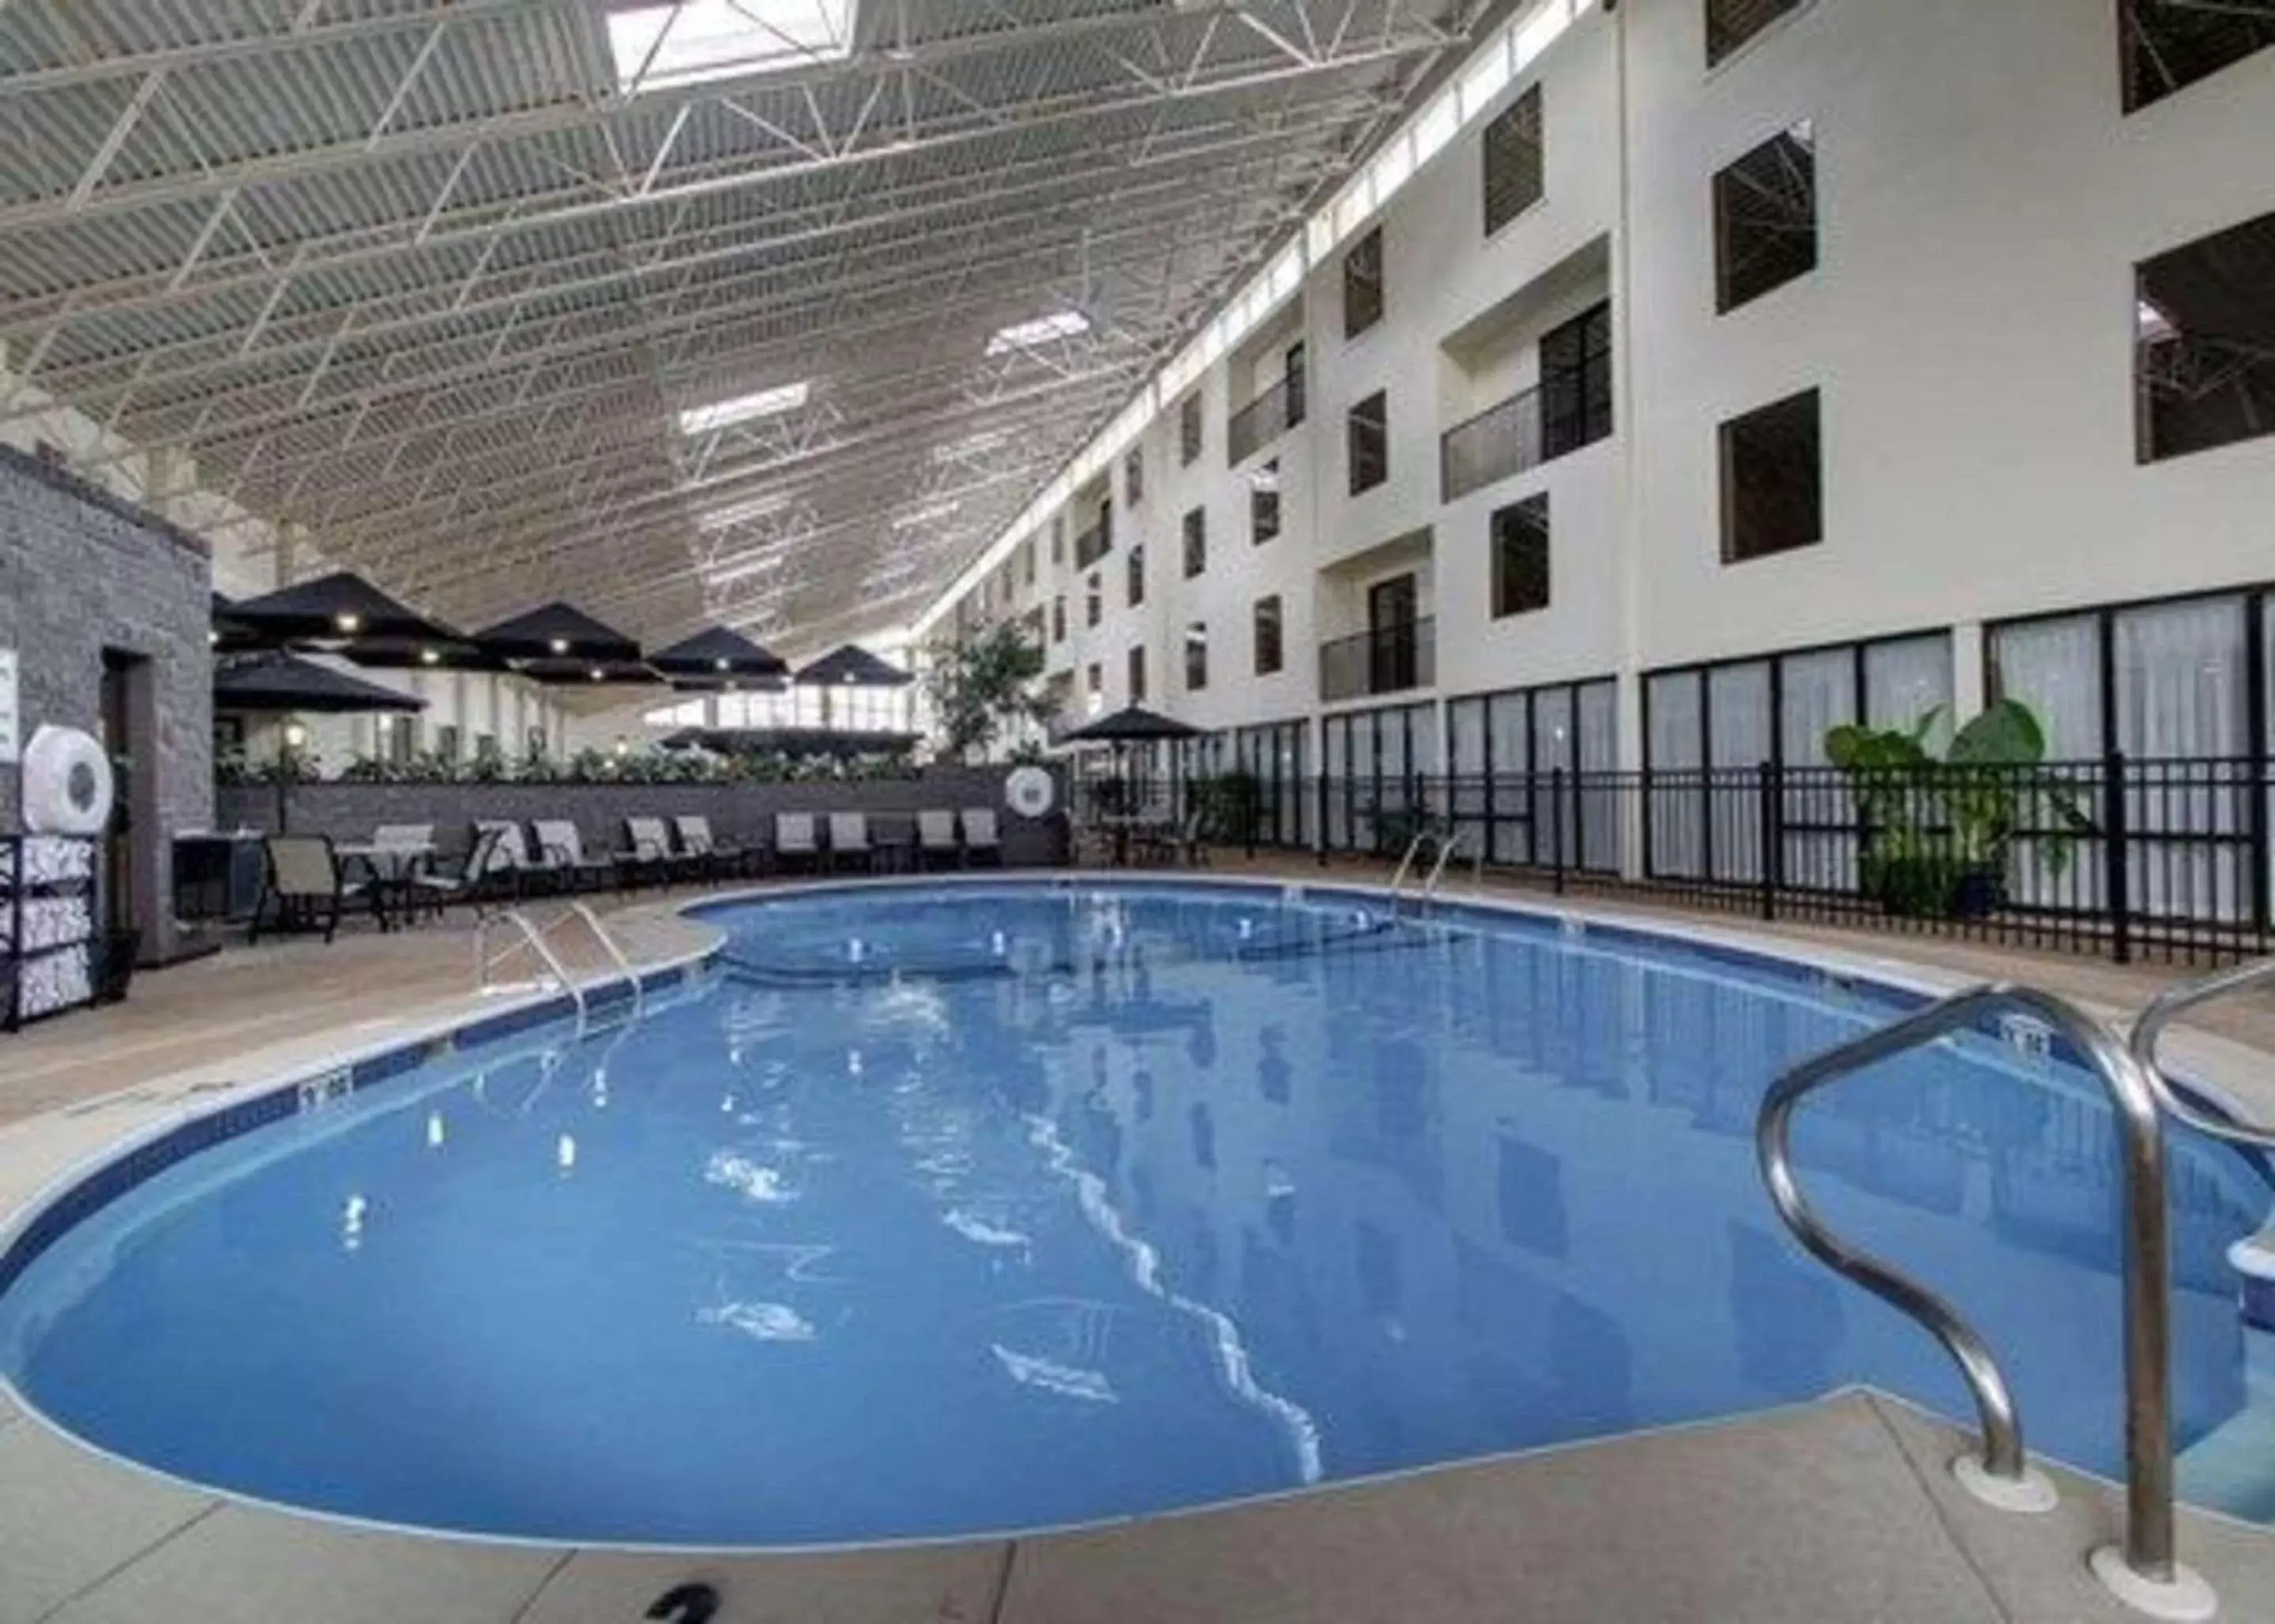 On site, Swimming Pool in The Atrium Hotel on Third